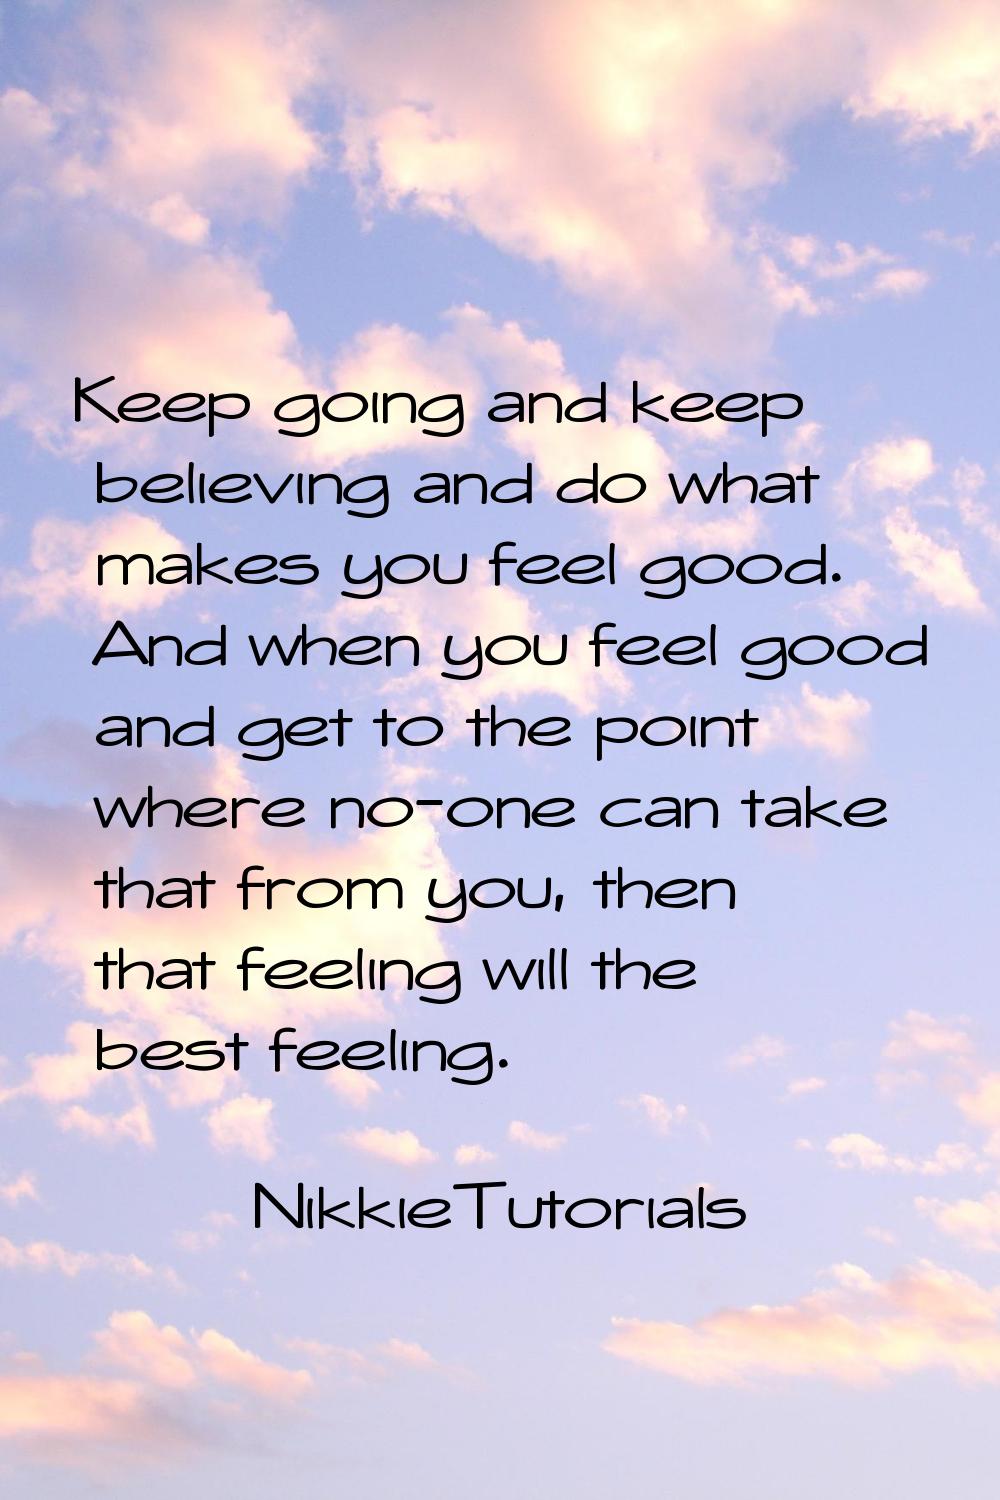 Keep going and keep believing and do what makes you feel good. And when you feel good and get to th